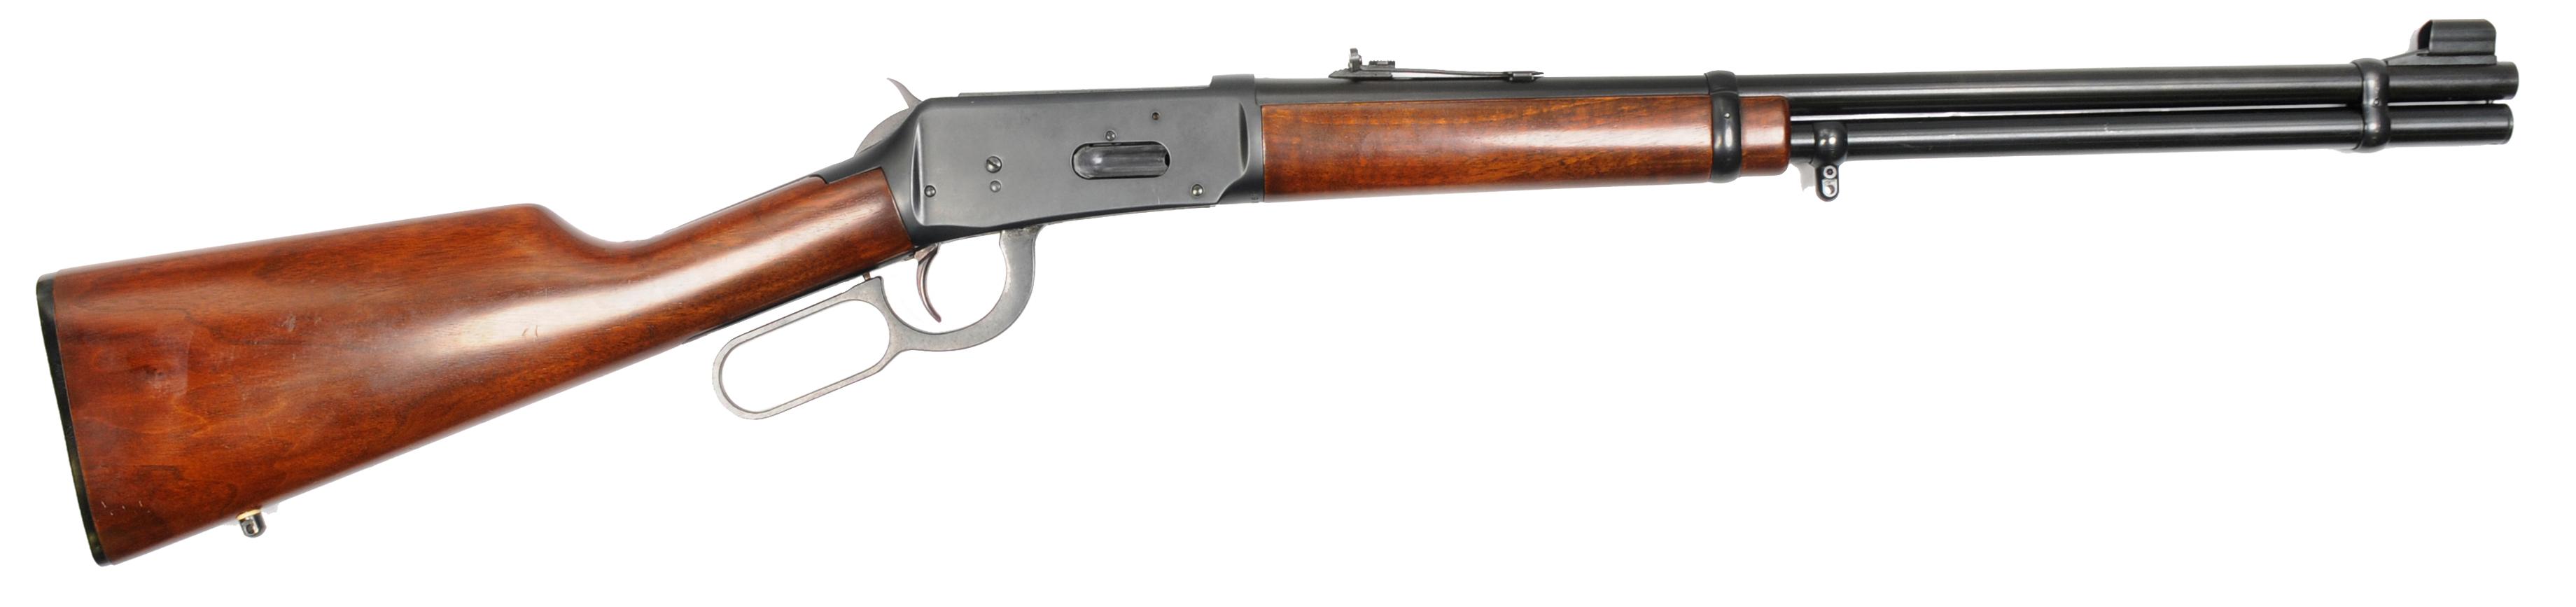 Winchester Model 94 30-30 Lever-Action Rifle - FFL # 4970330 (NBV1)